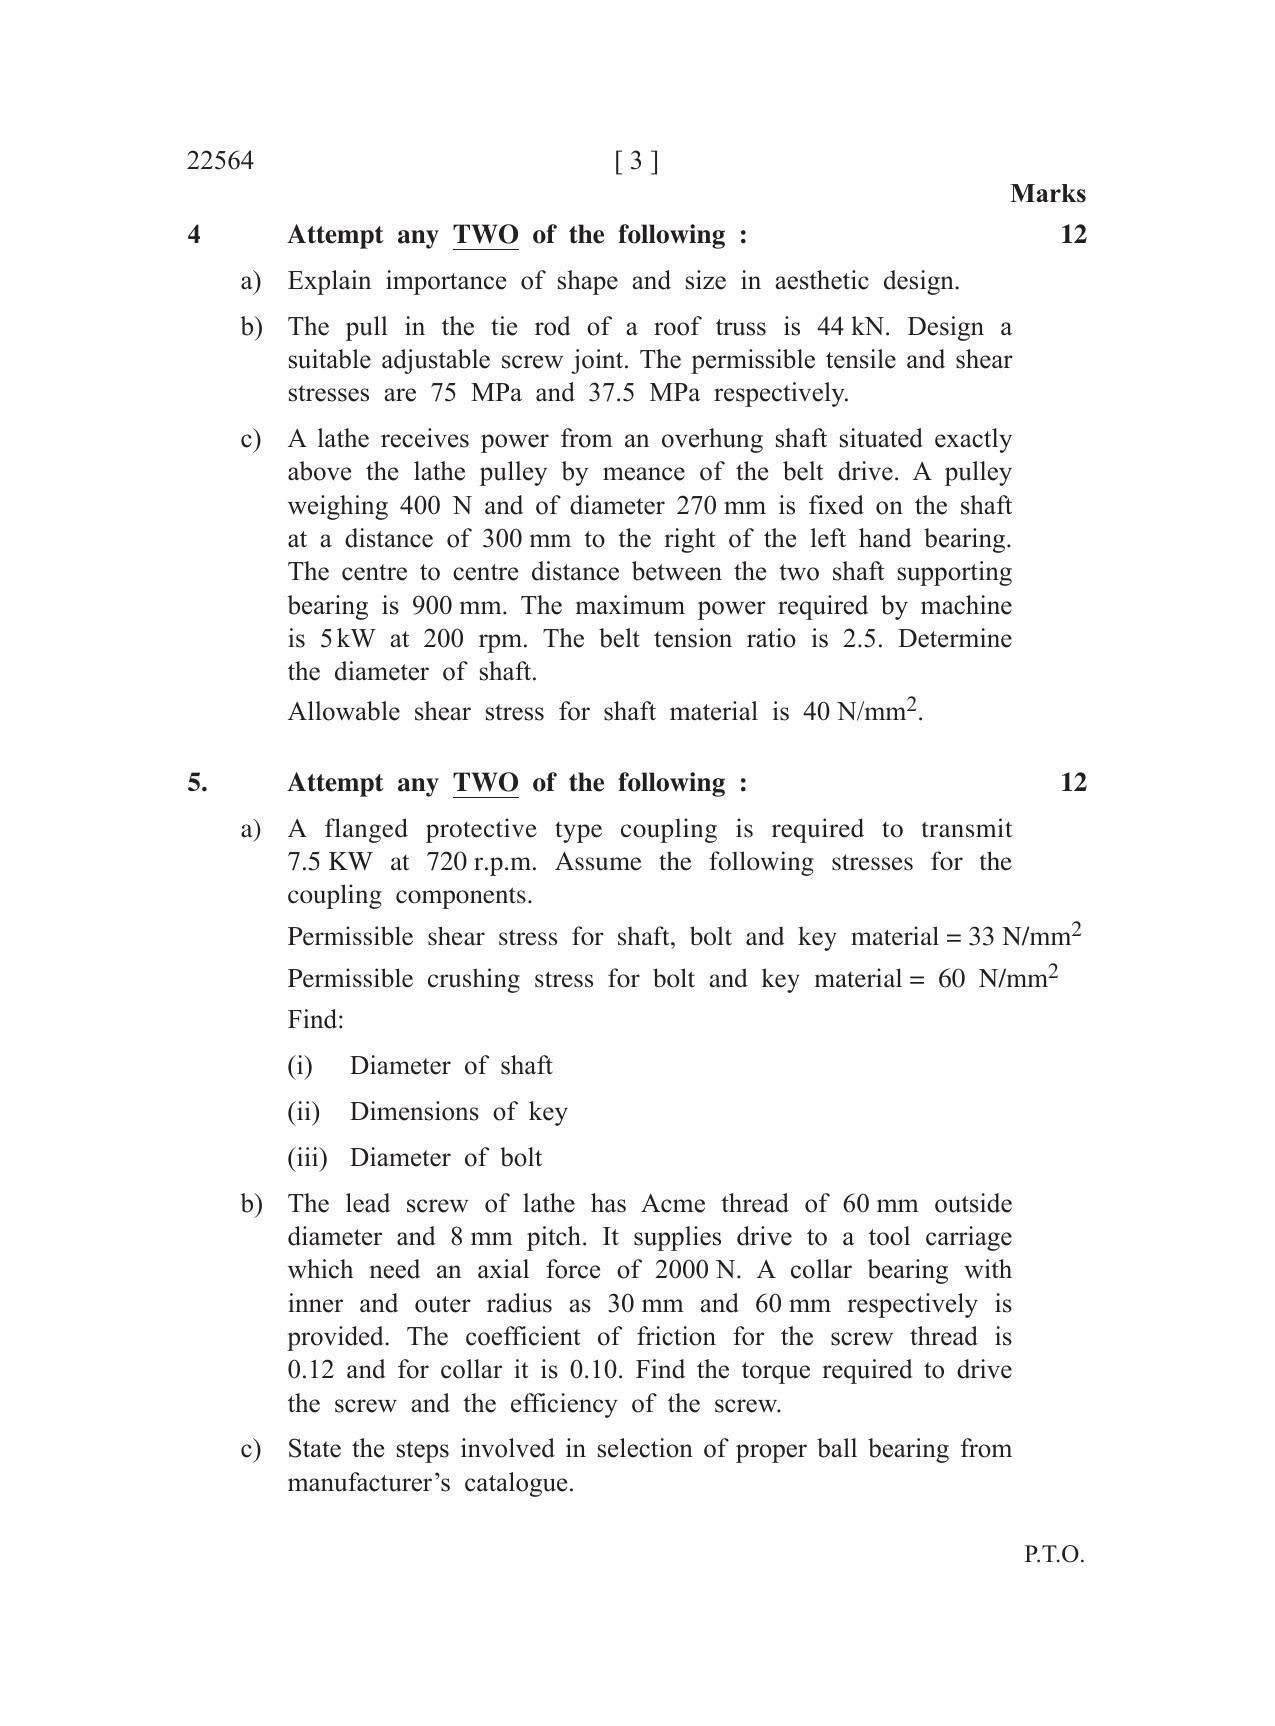 MSBTE Question Paper - 2019 - Elements of Machine Design - Page 3